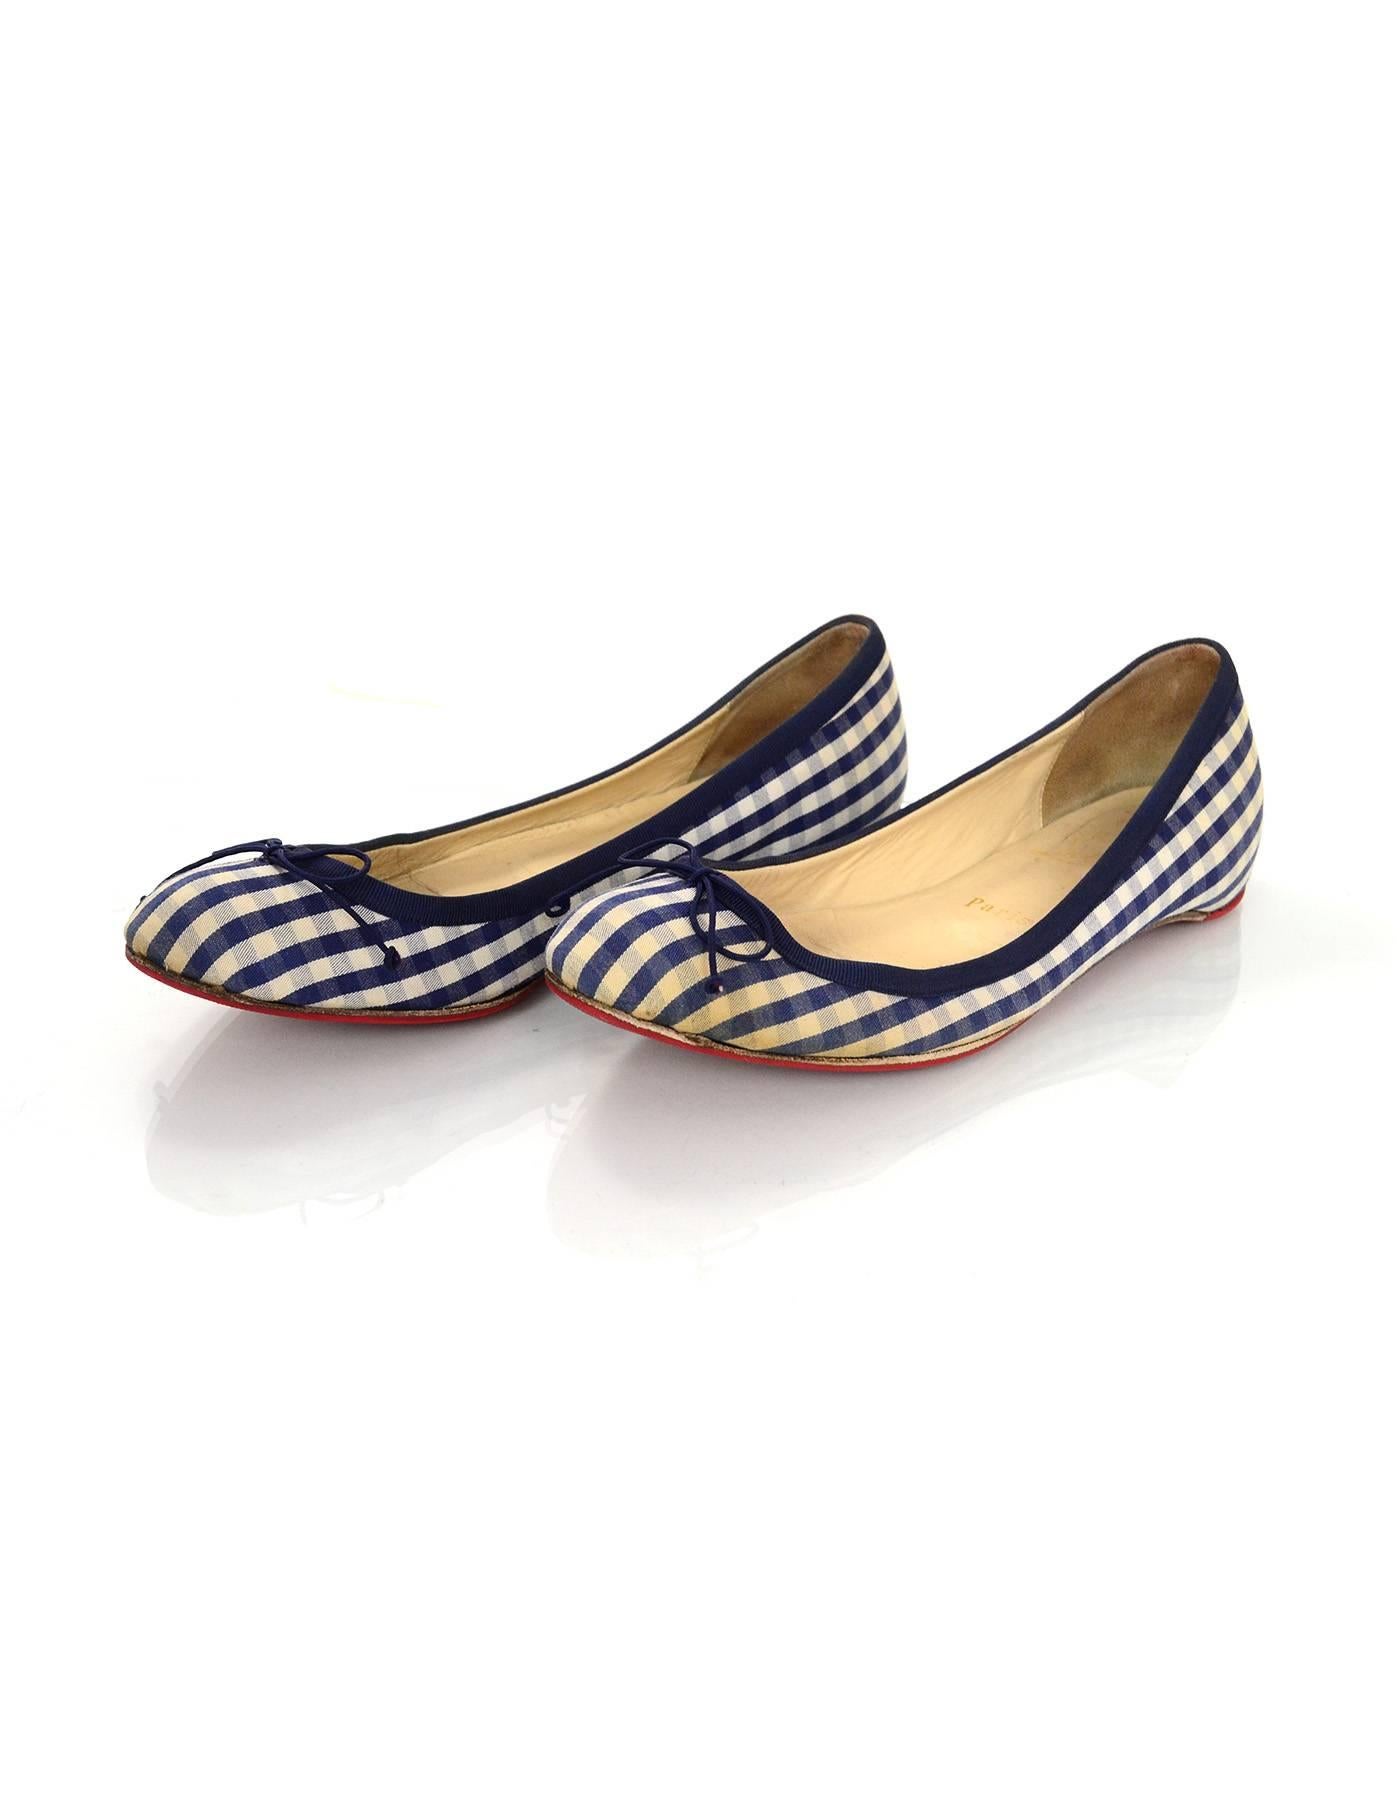 Christian Louboutin Blue & White Gingham Flats Sz 37

Made In: Italy
Color: Blue, white
Closure/Opening: Slip on
Sole Stamp: Christian Louboutin MADE IN ITALY 37
Overall Condition: Very good pre-owned condition with the exception of light